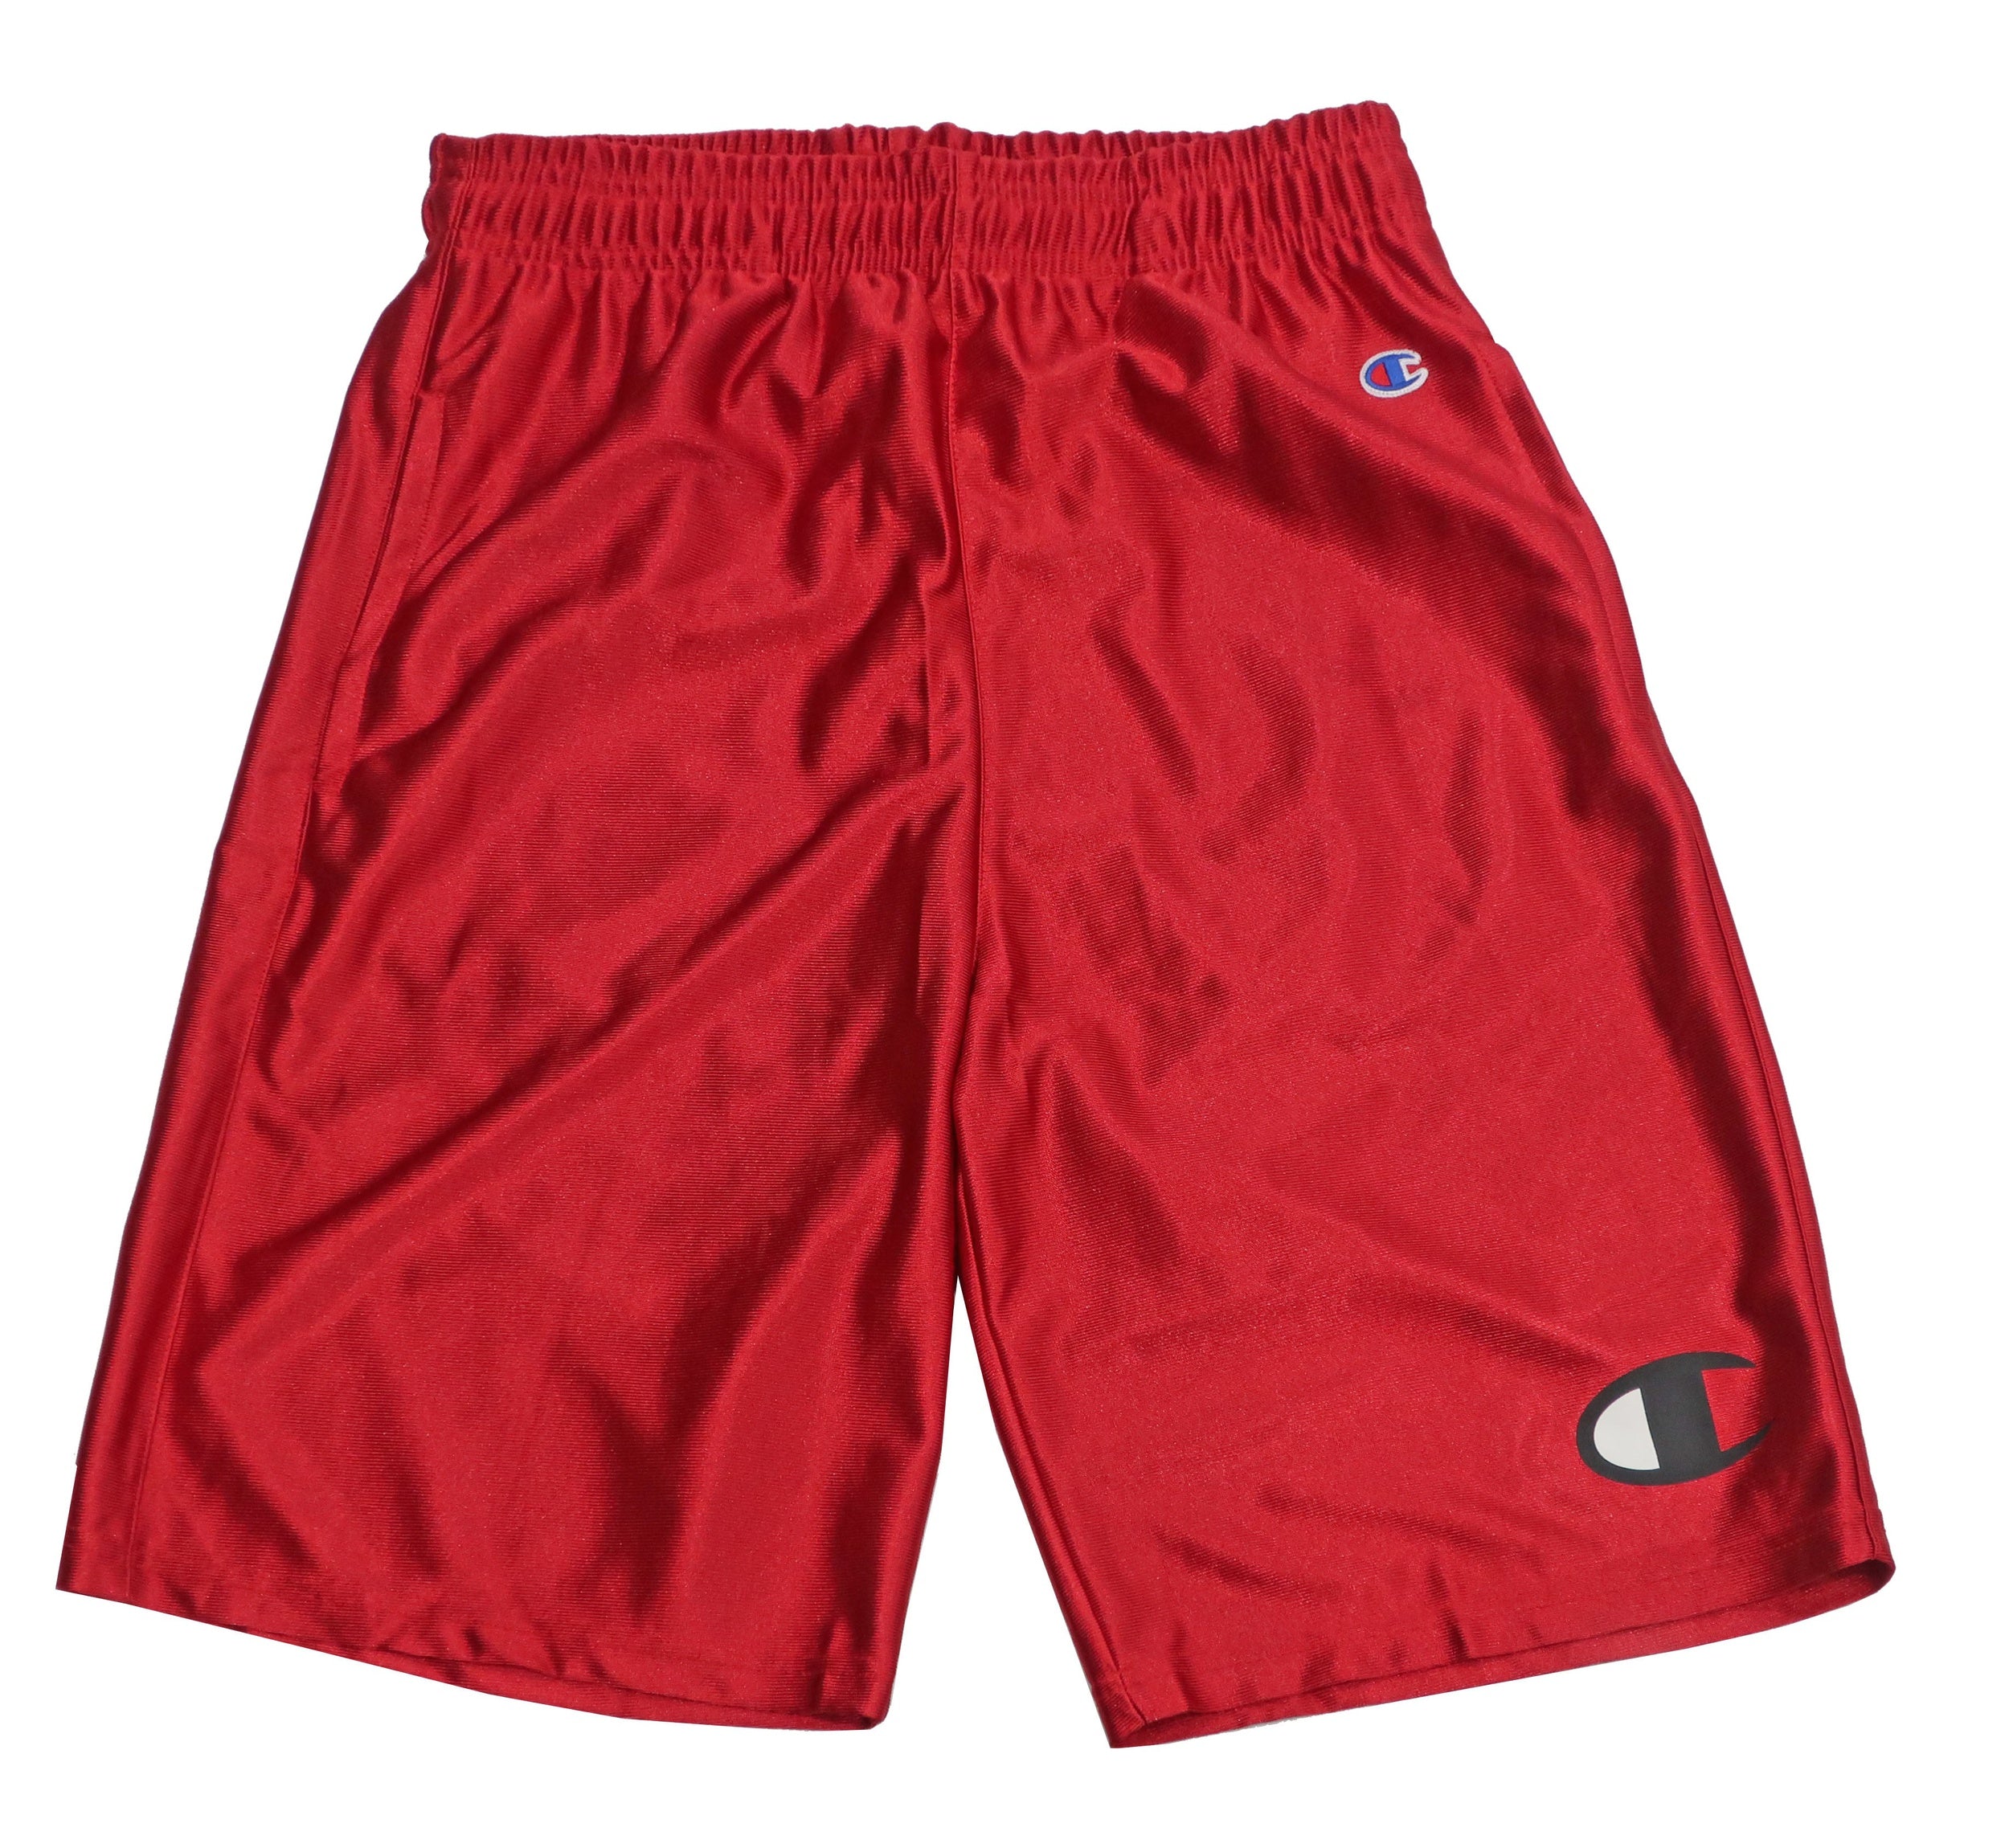 Dazzle Mesh Shorts - Red